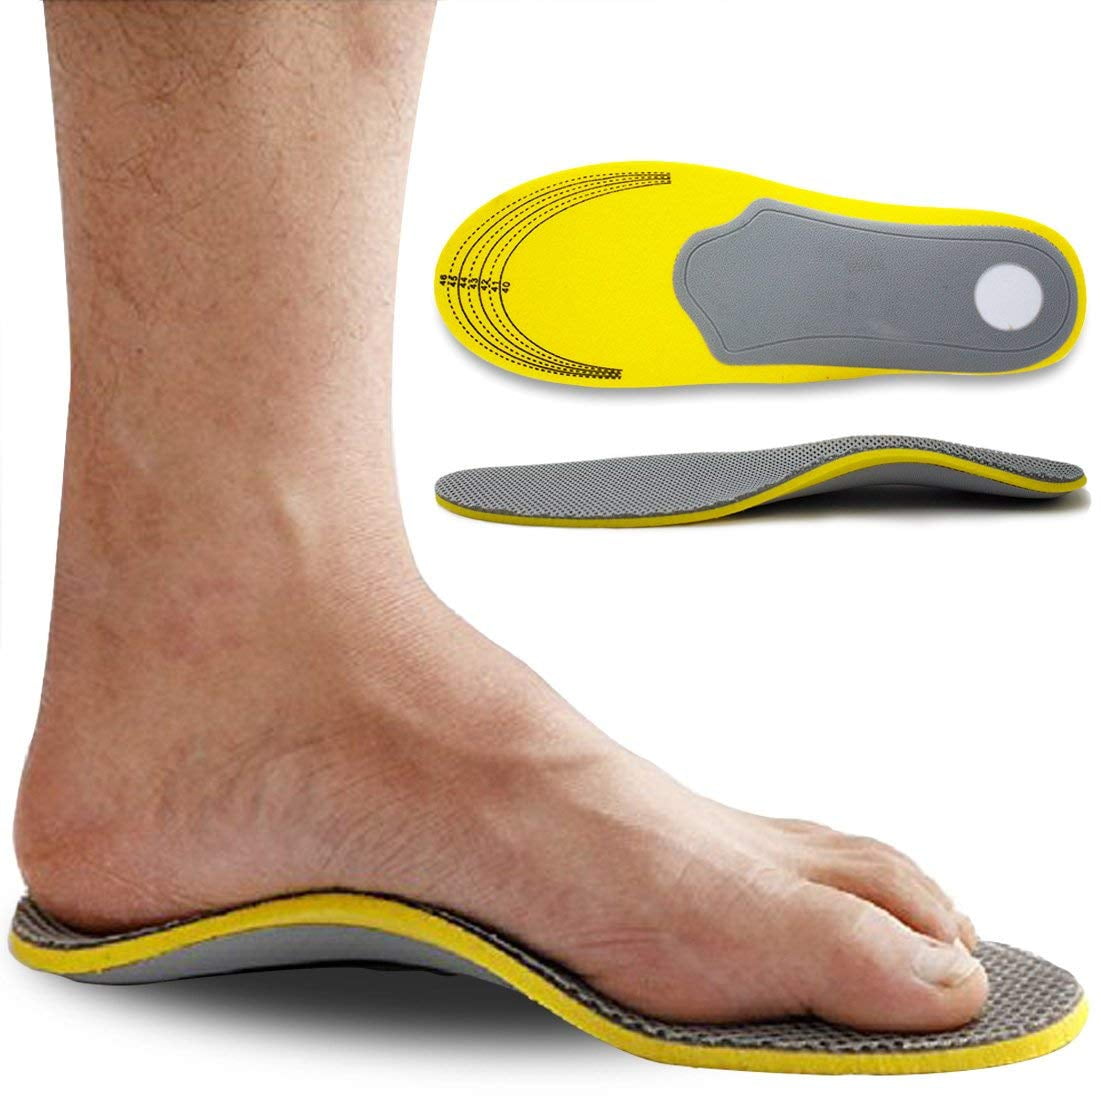 Orthotic Insole Arch Support Flat Feet Insert Foot Care Plantar Fasciitis Relief 